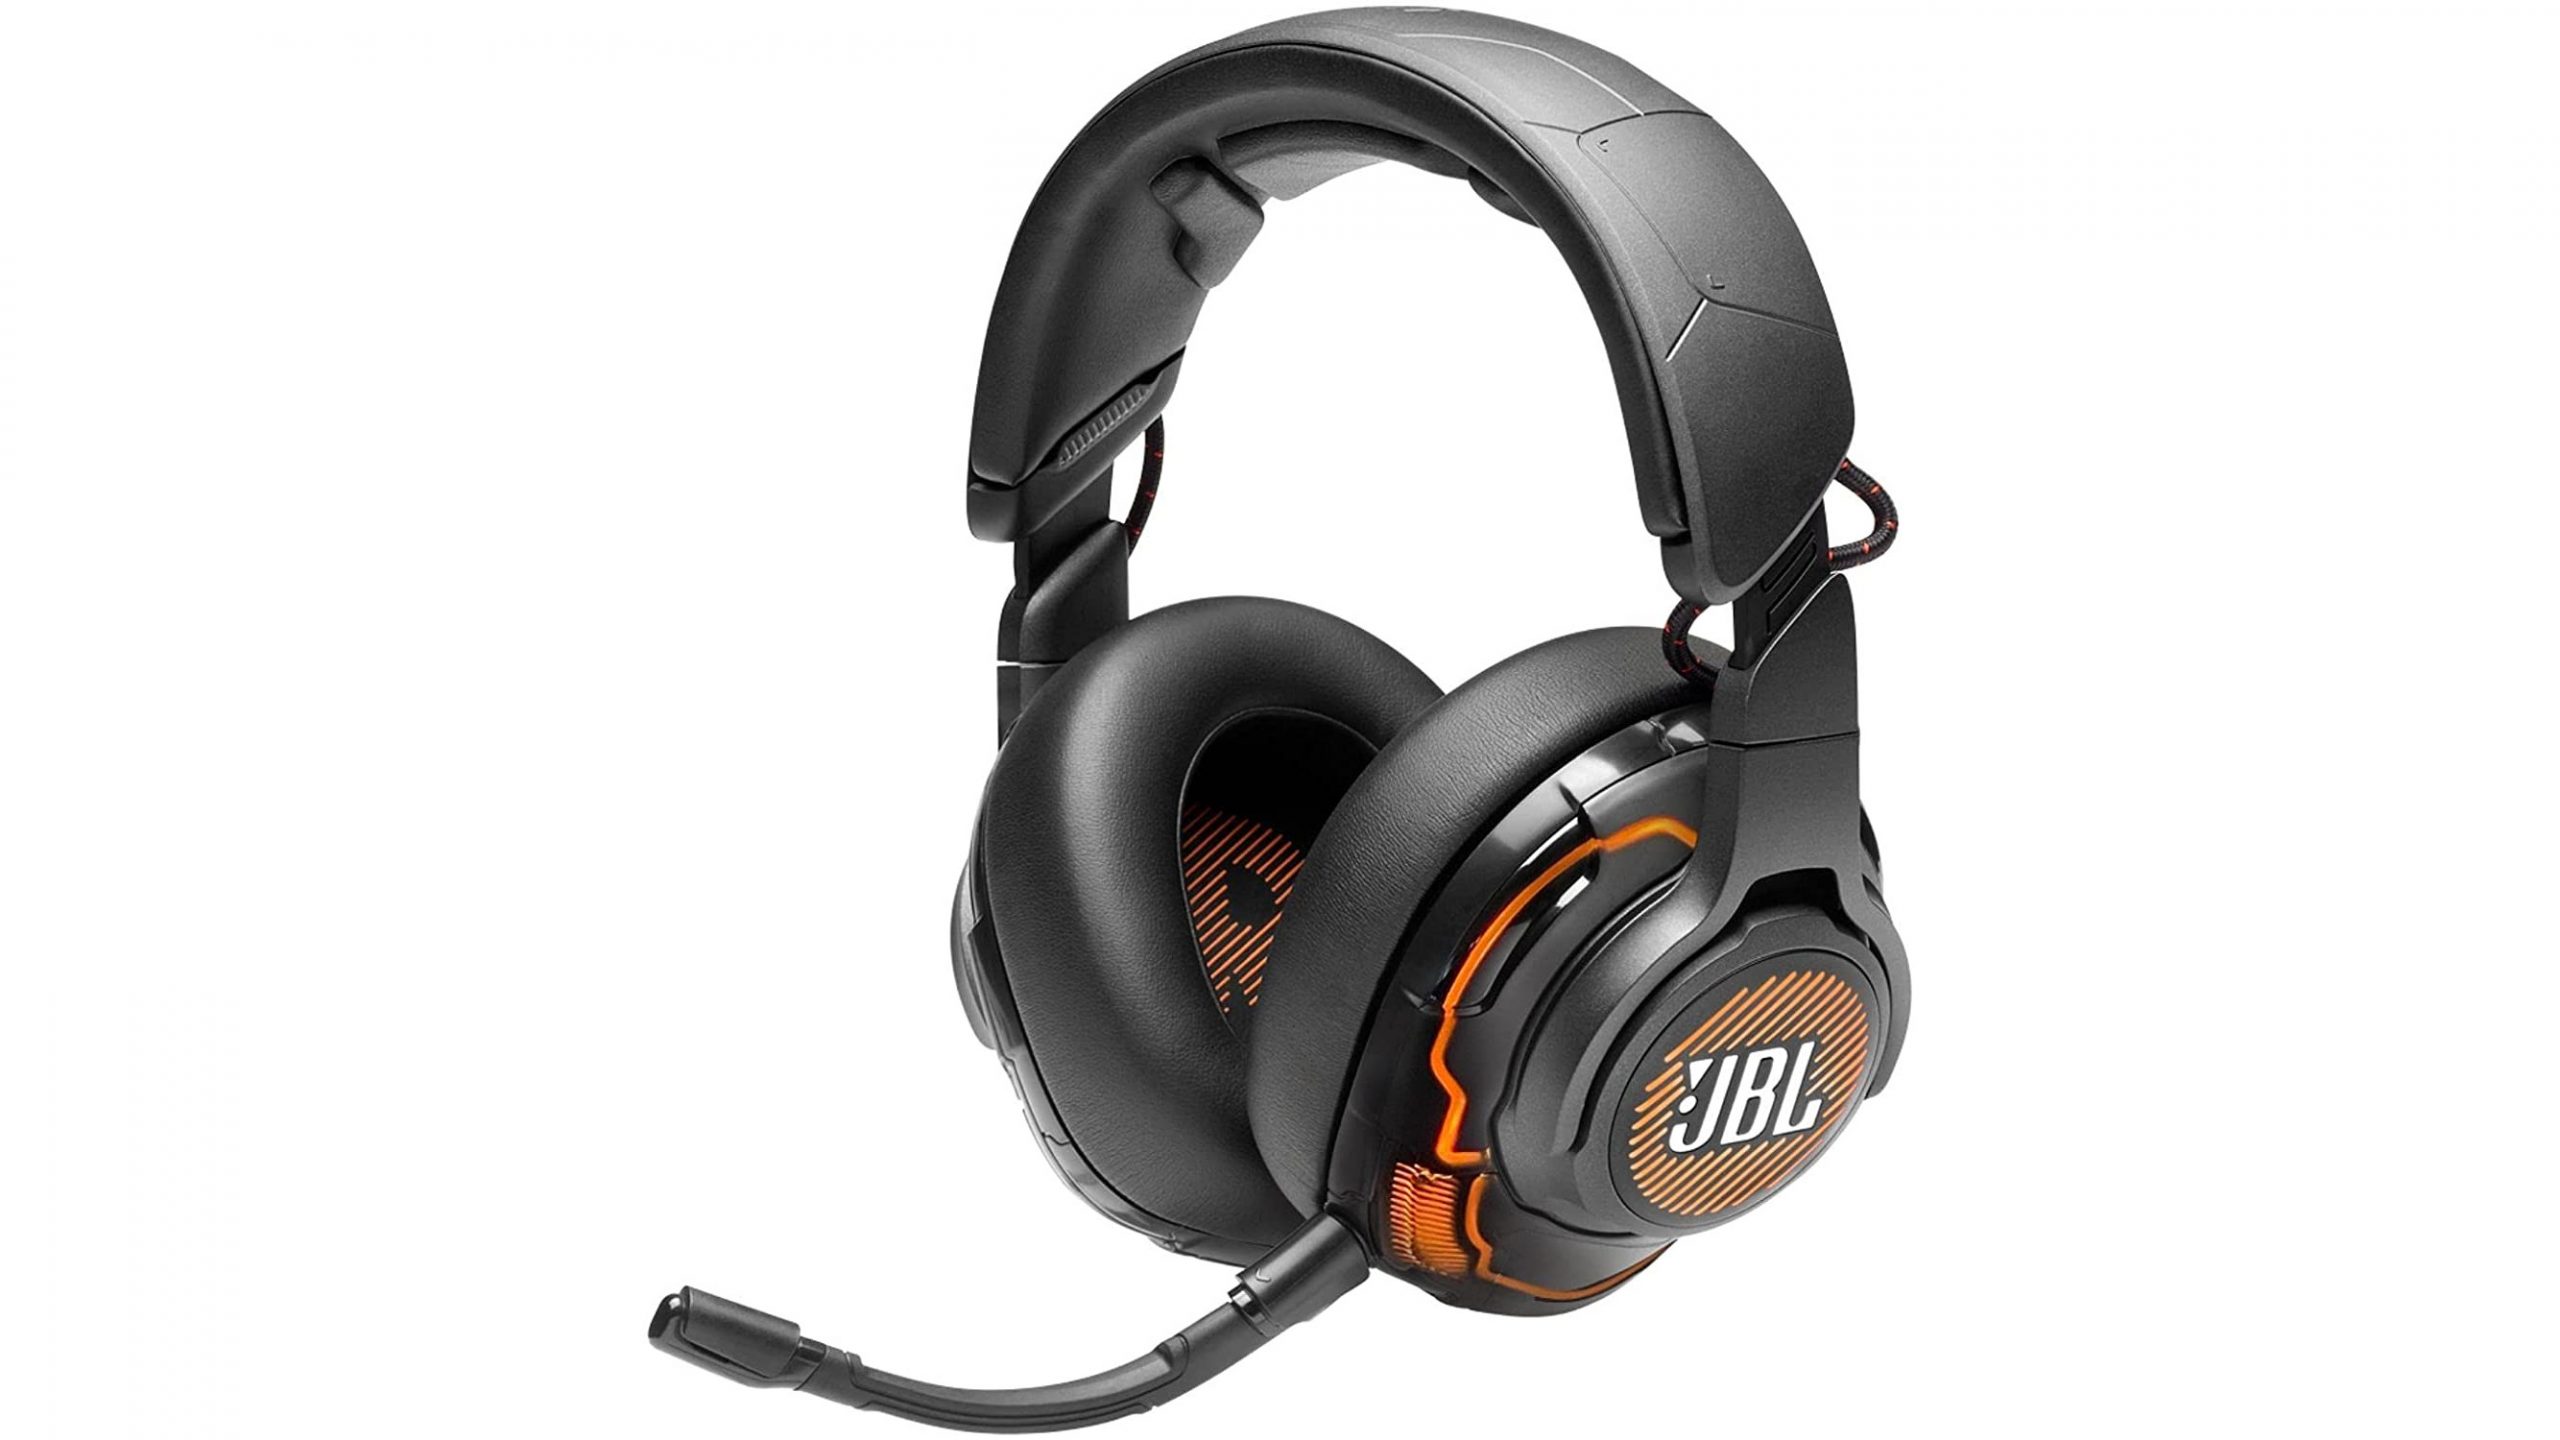 The JBL Quantum One headset on a white background